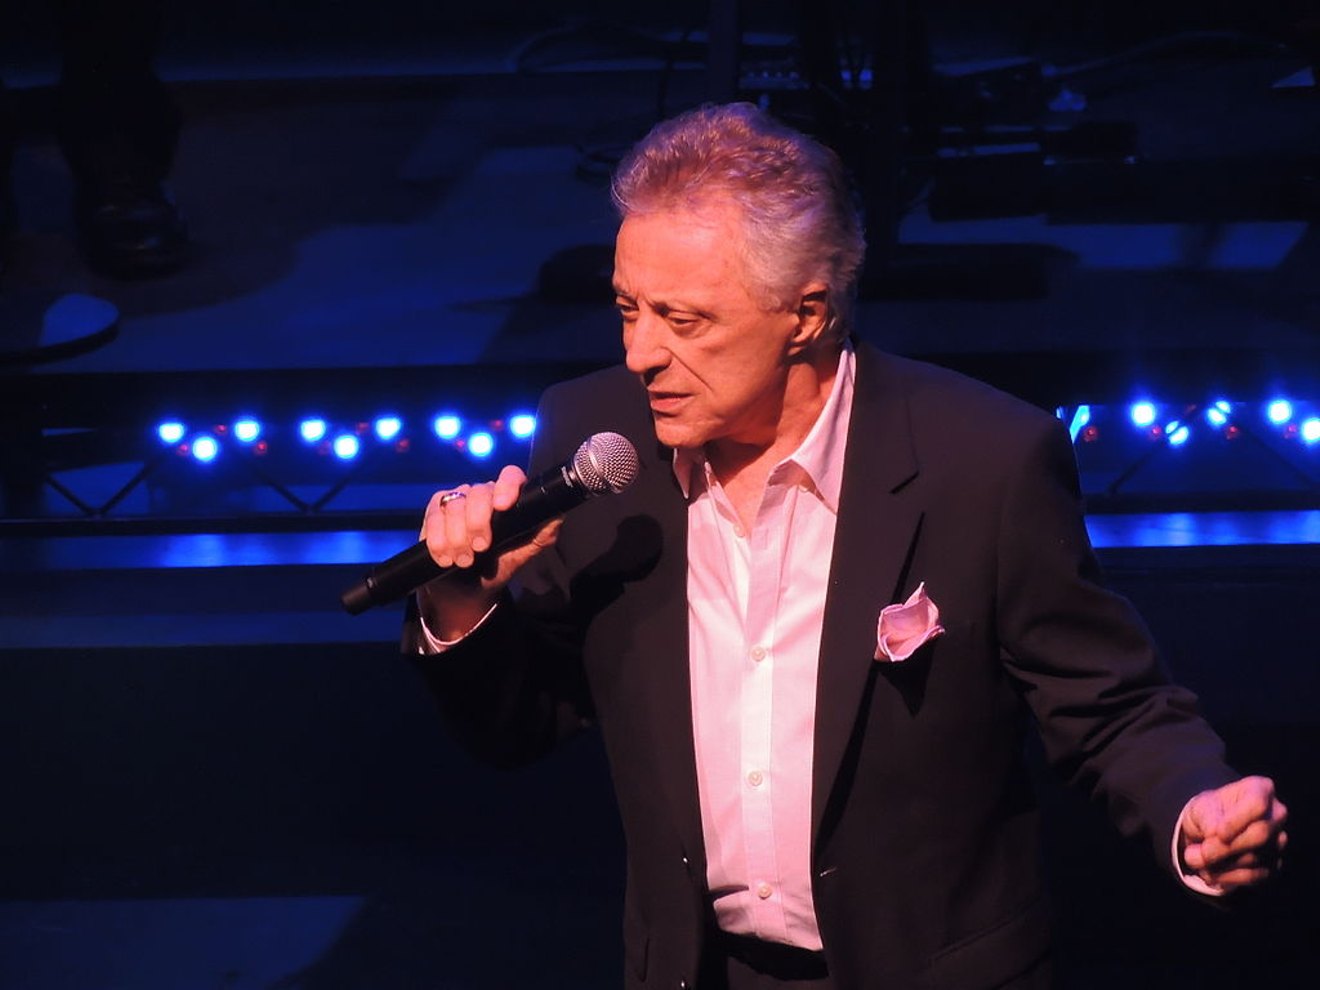 There's more to Frankie Valli than Jersey Boys.